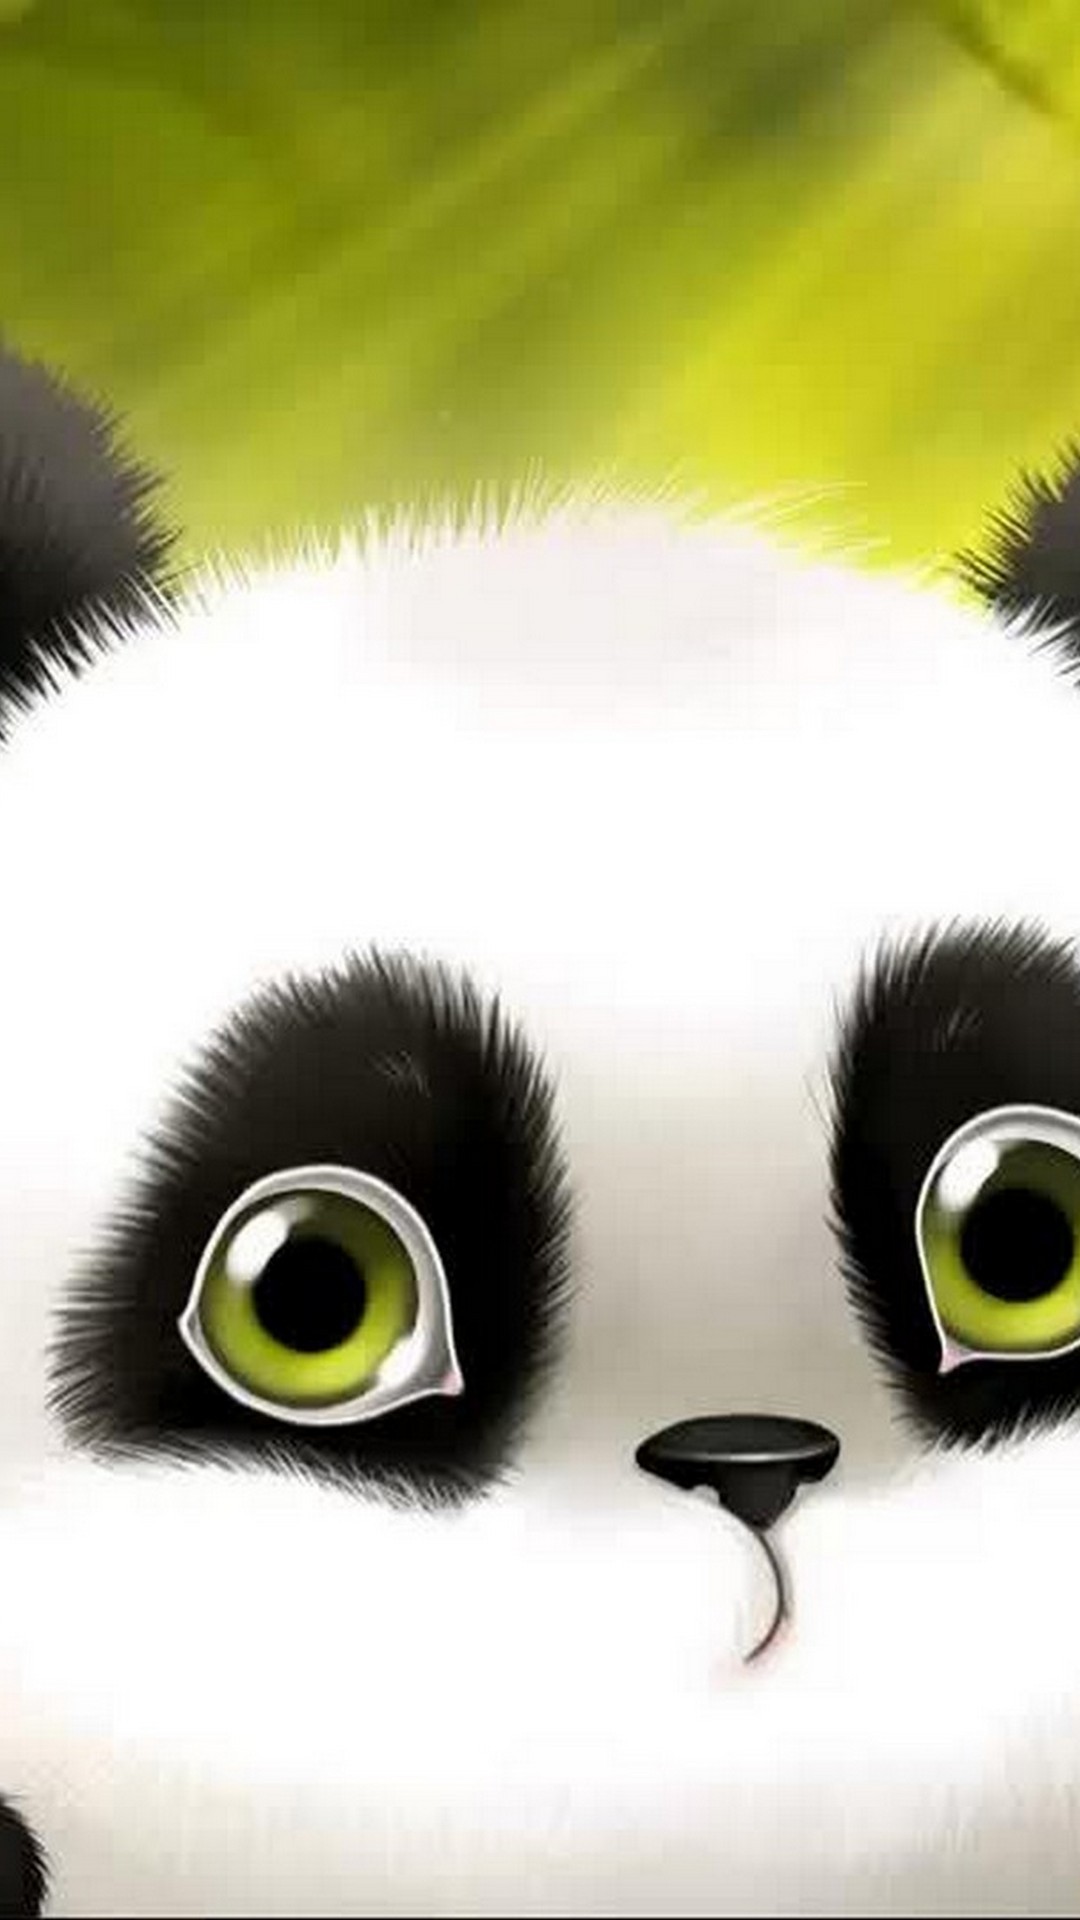 Android Wallpaper Hd Cute Panda With Hd Resolution - Android Cute Wallpaper  Hd - 1080x1920 Wallpaper 